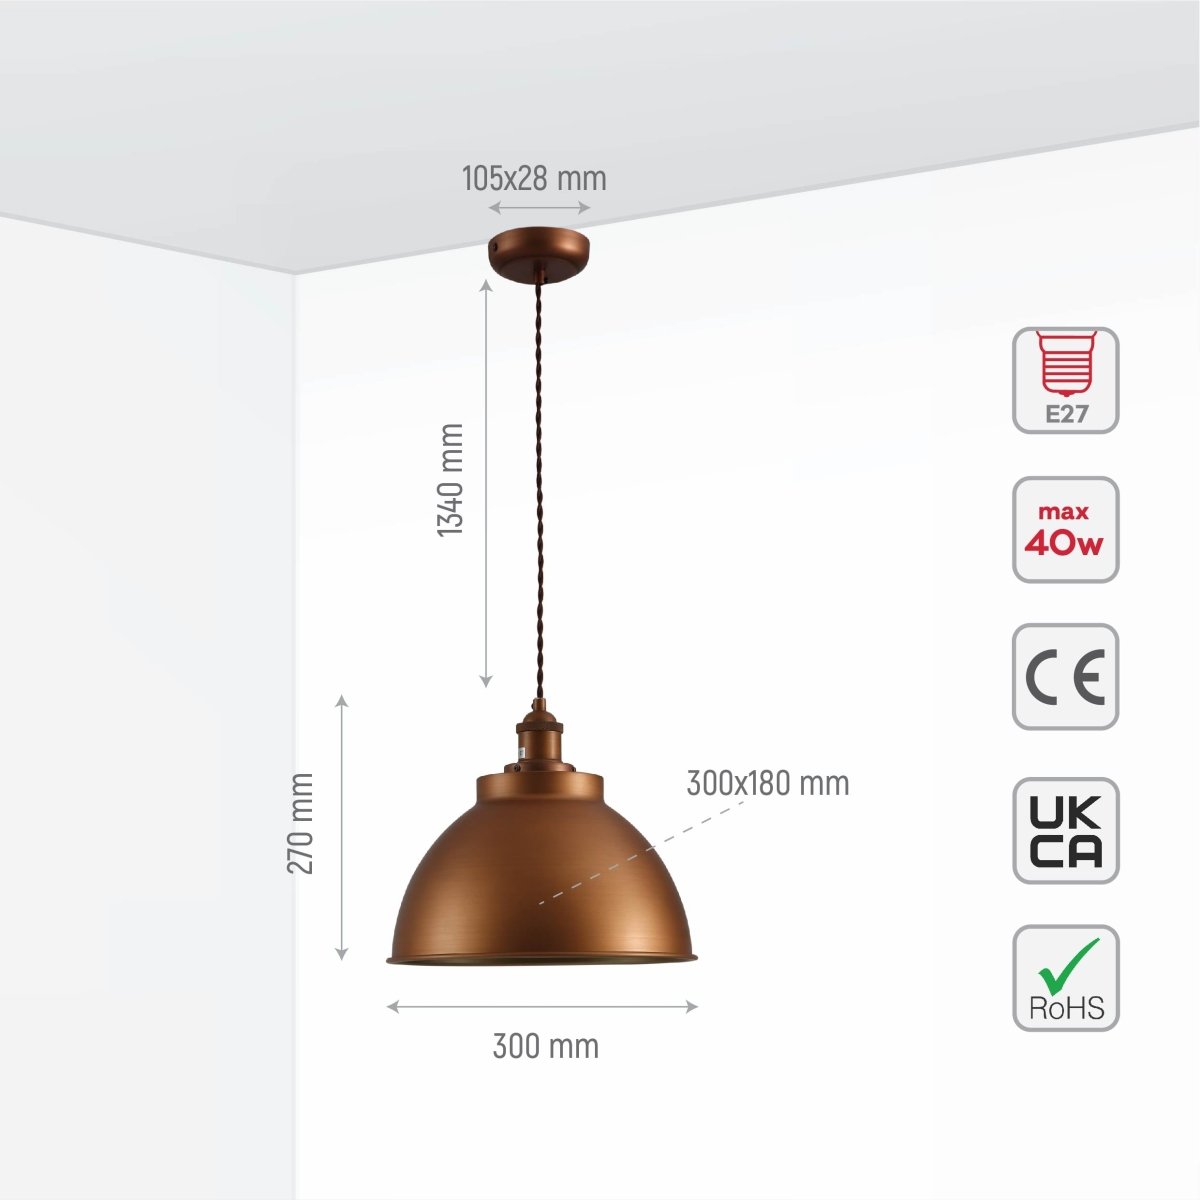 Size and specs of Brooklyn Vintage Metal Dome Pendant Light Pewter Copper  Bronze E27  | TEKLED 150-18209